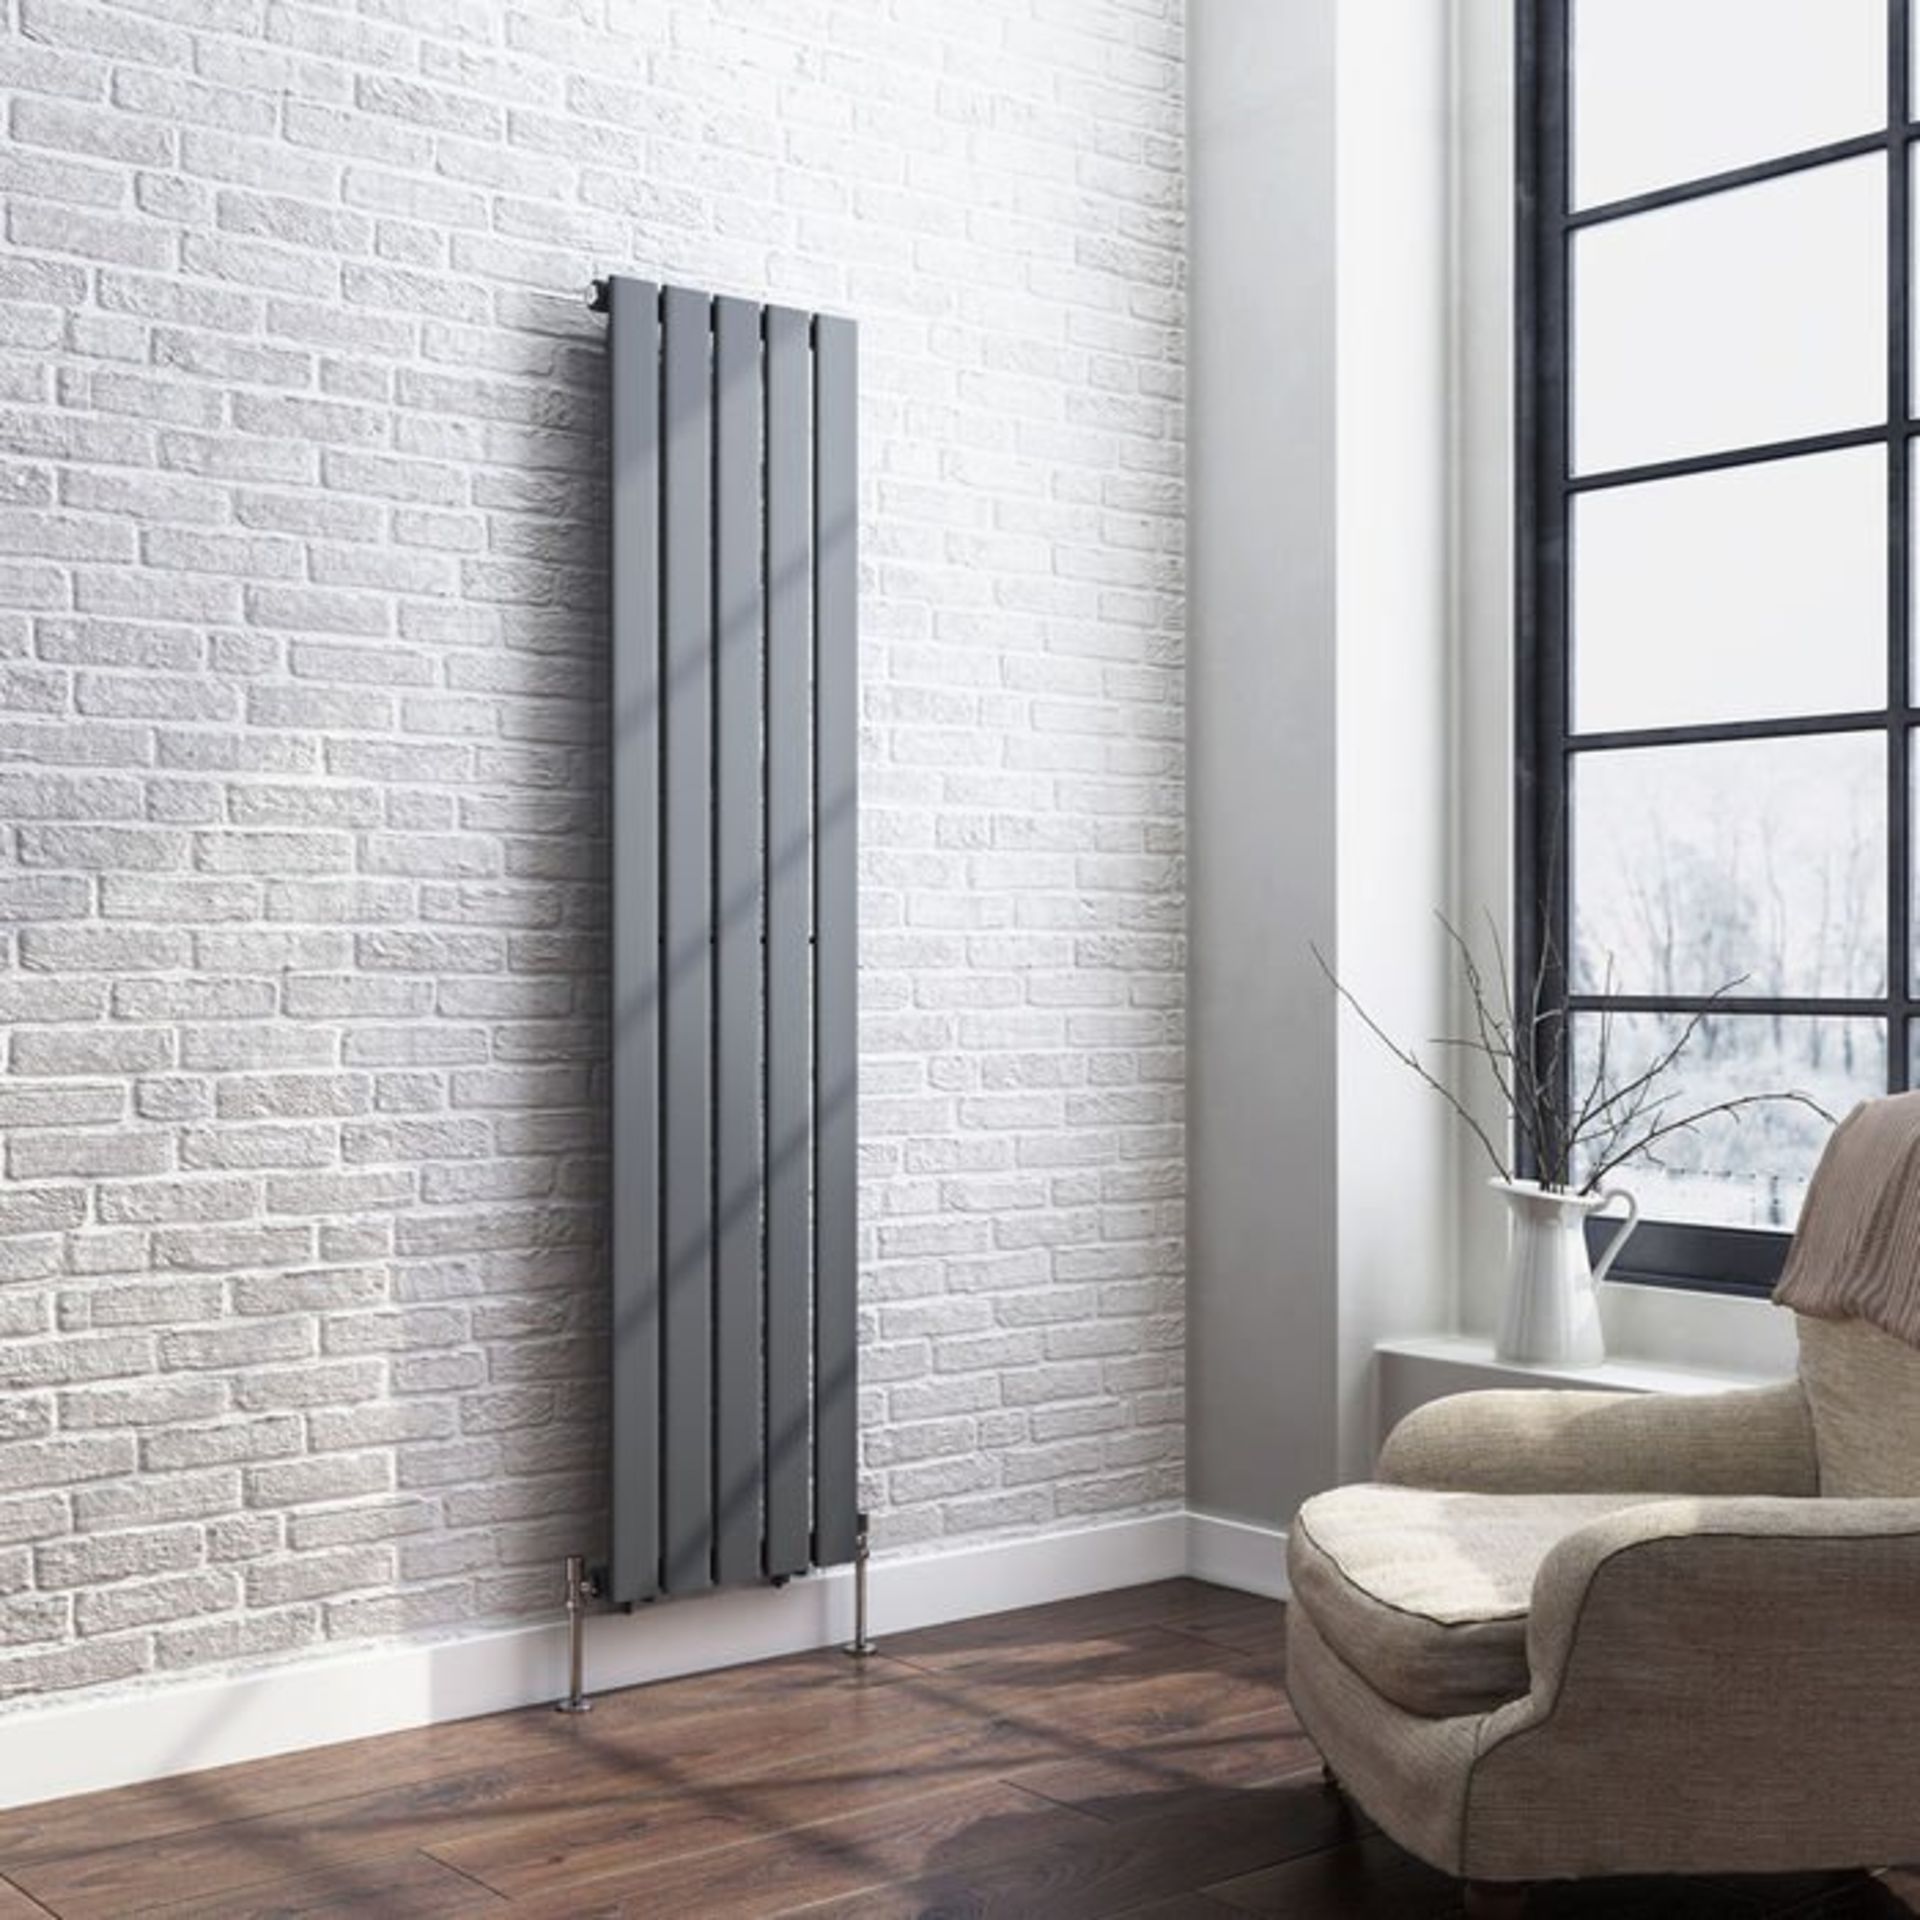 (H206) 1600x376mm Anthracite Single Flat Panel Vertical Radiator. RRP 175.99. Low carbon steel, high